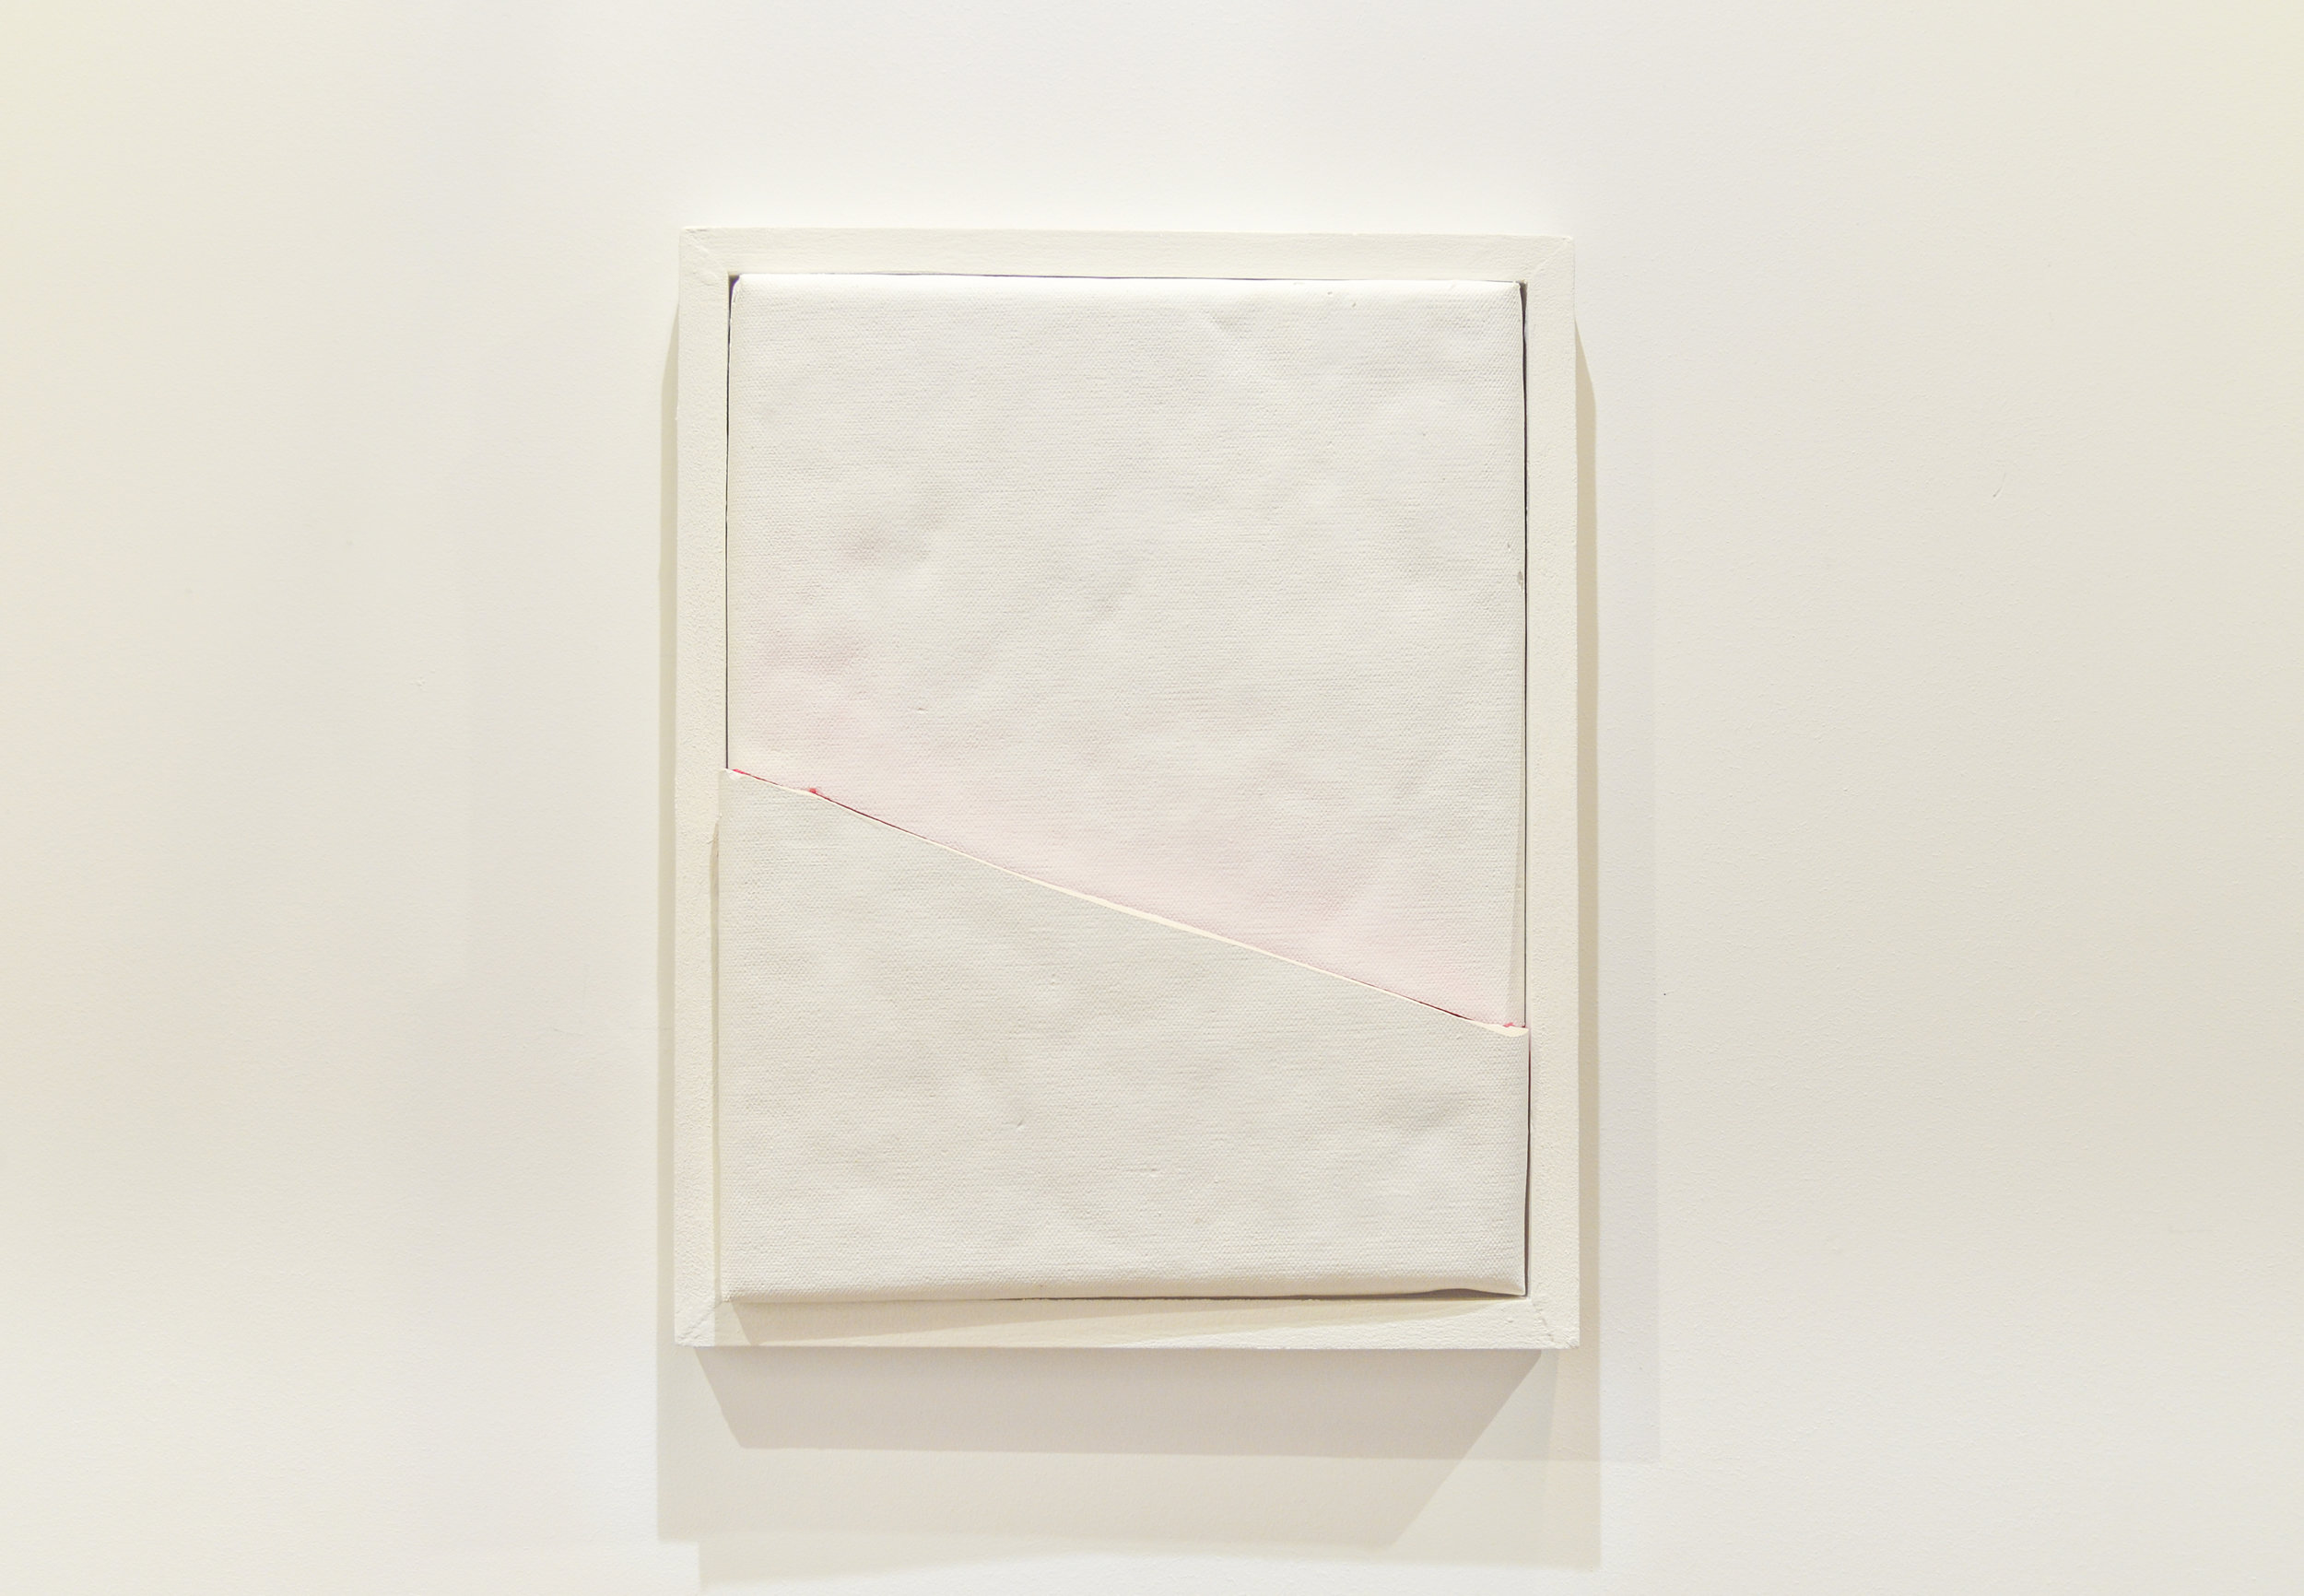 A show about the canvas(The window), 35cm x 45cm, Plaster, acrylic, spray and wood 2018